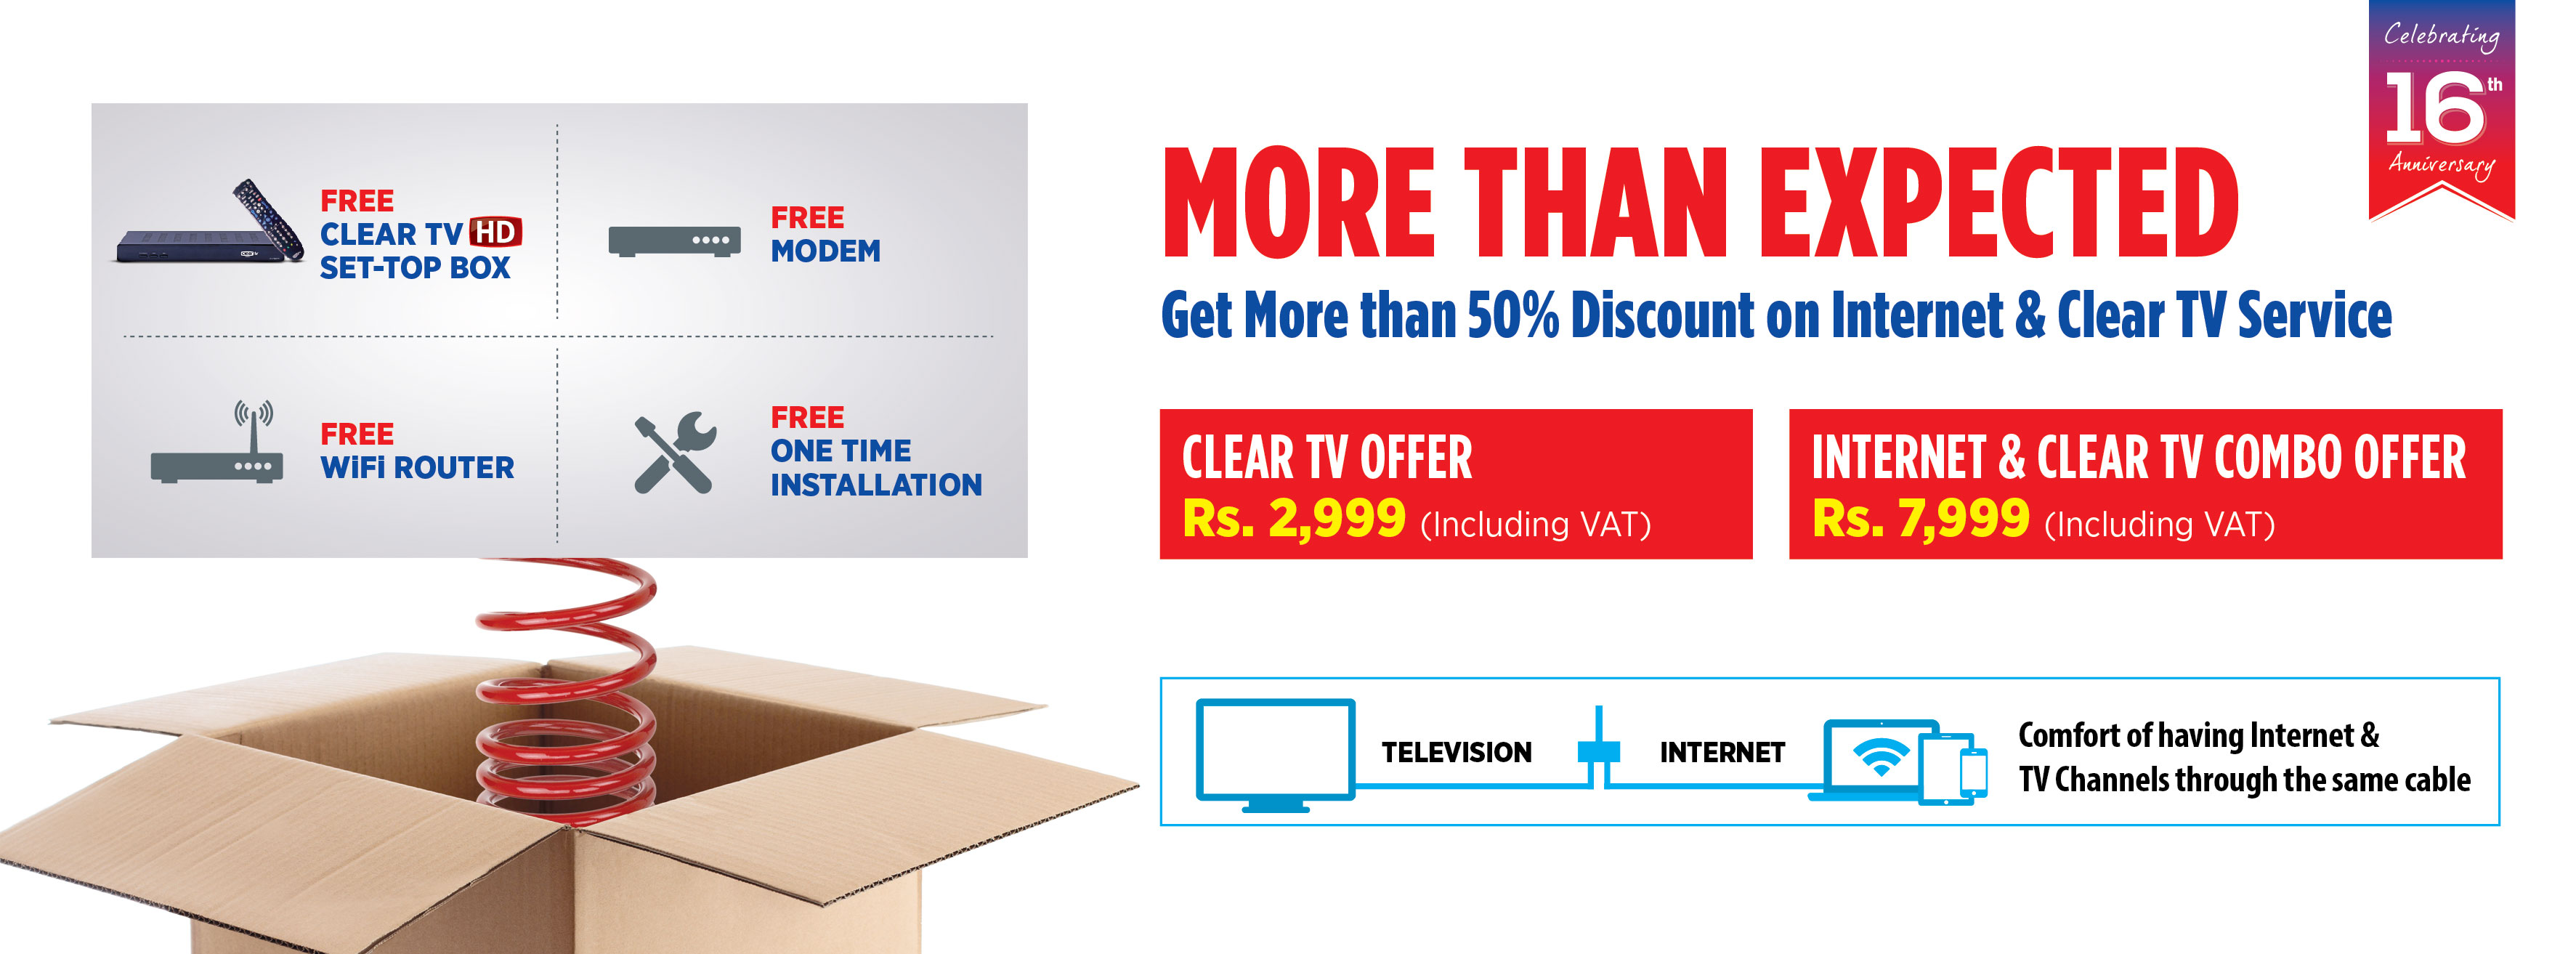 Subisu Celebrates its 16th Anniversary Offering 50% Discount on Internet and Clear TV